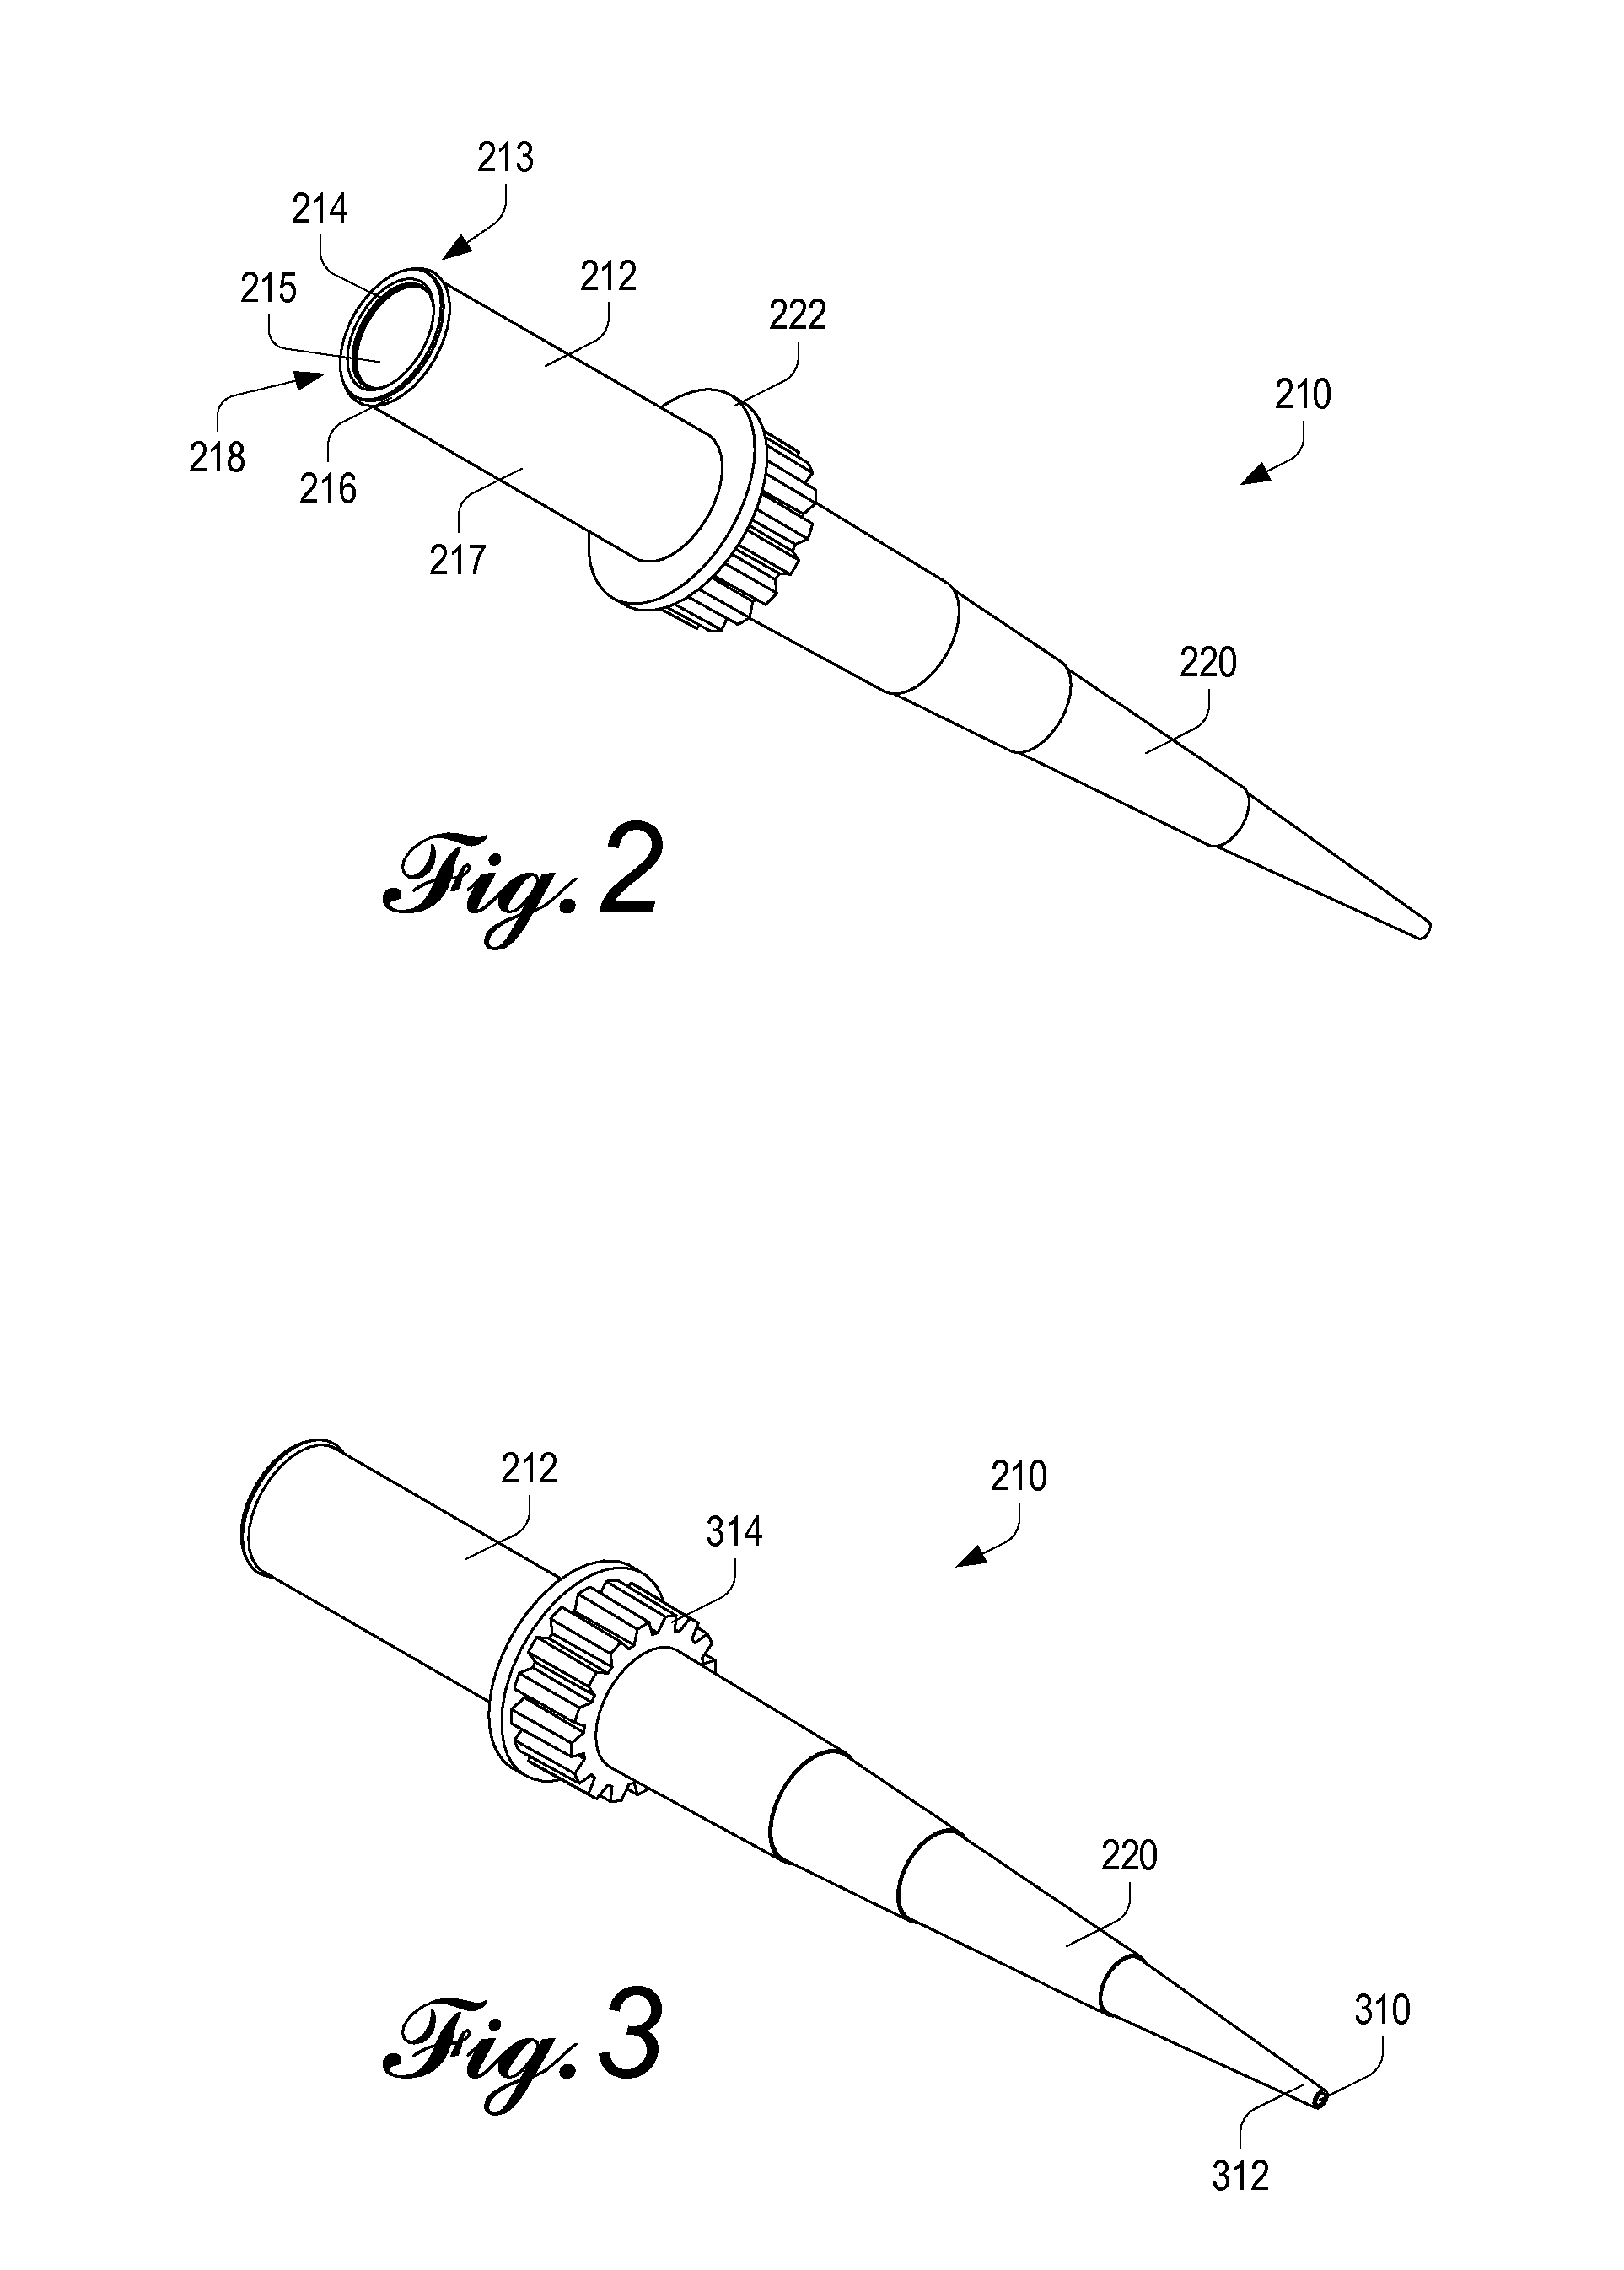 Pipette and sealing tip